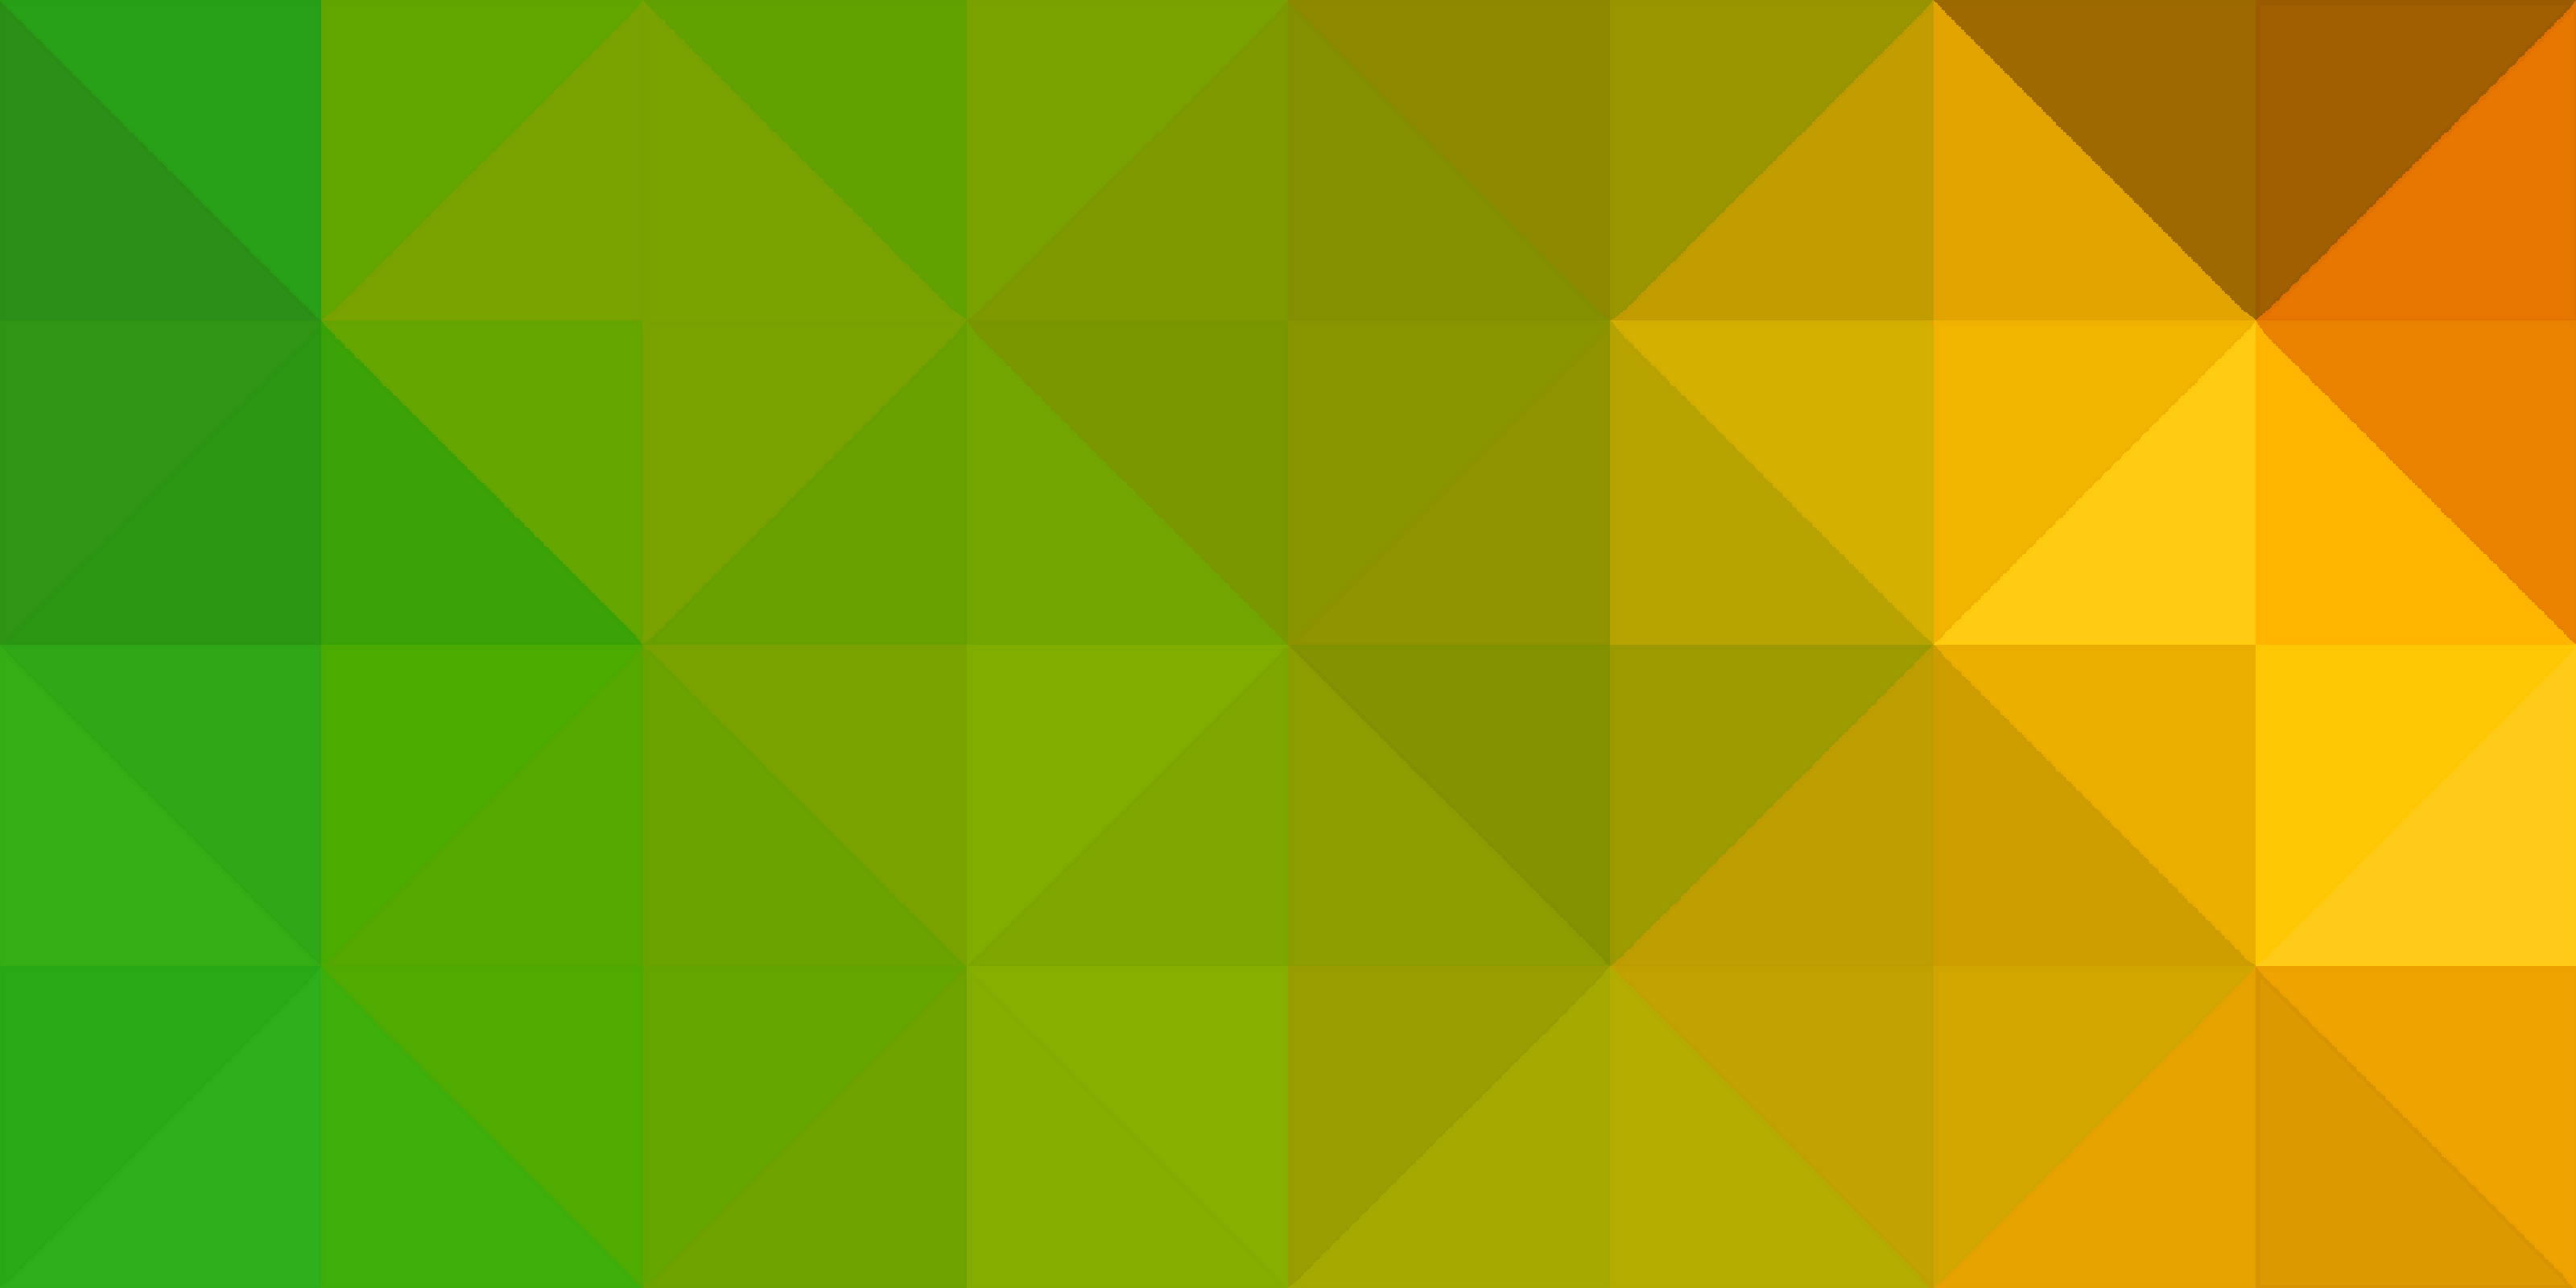 Green Triangles Graphic